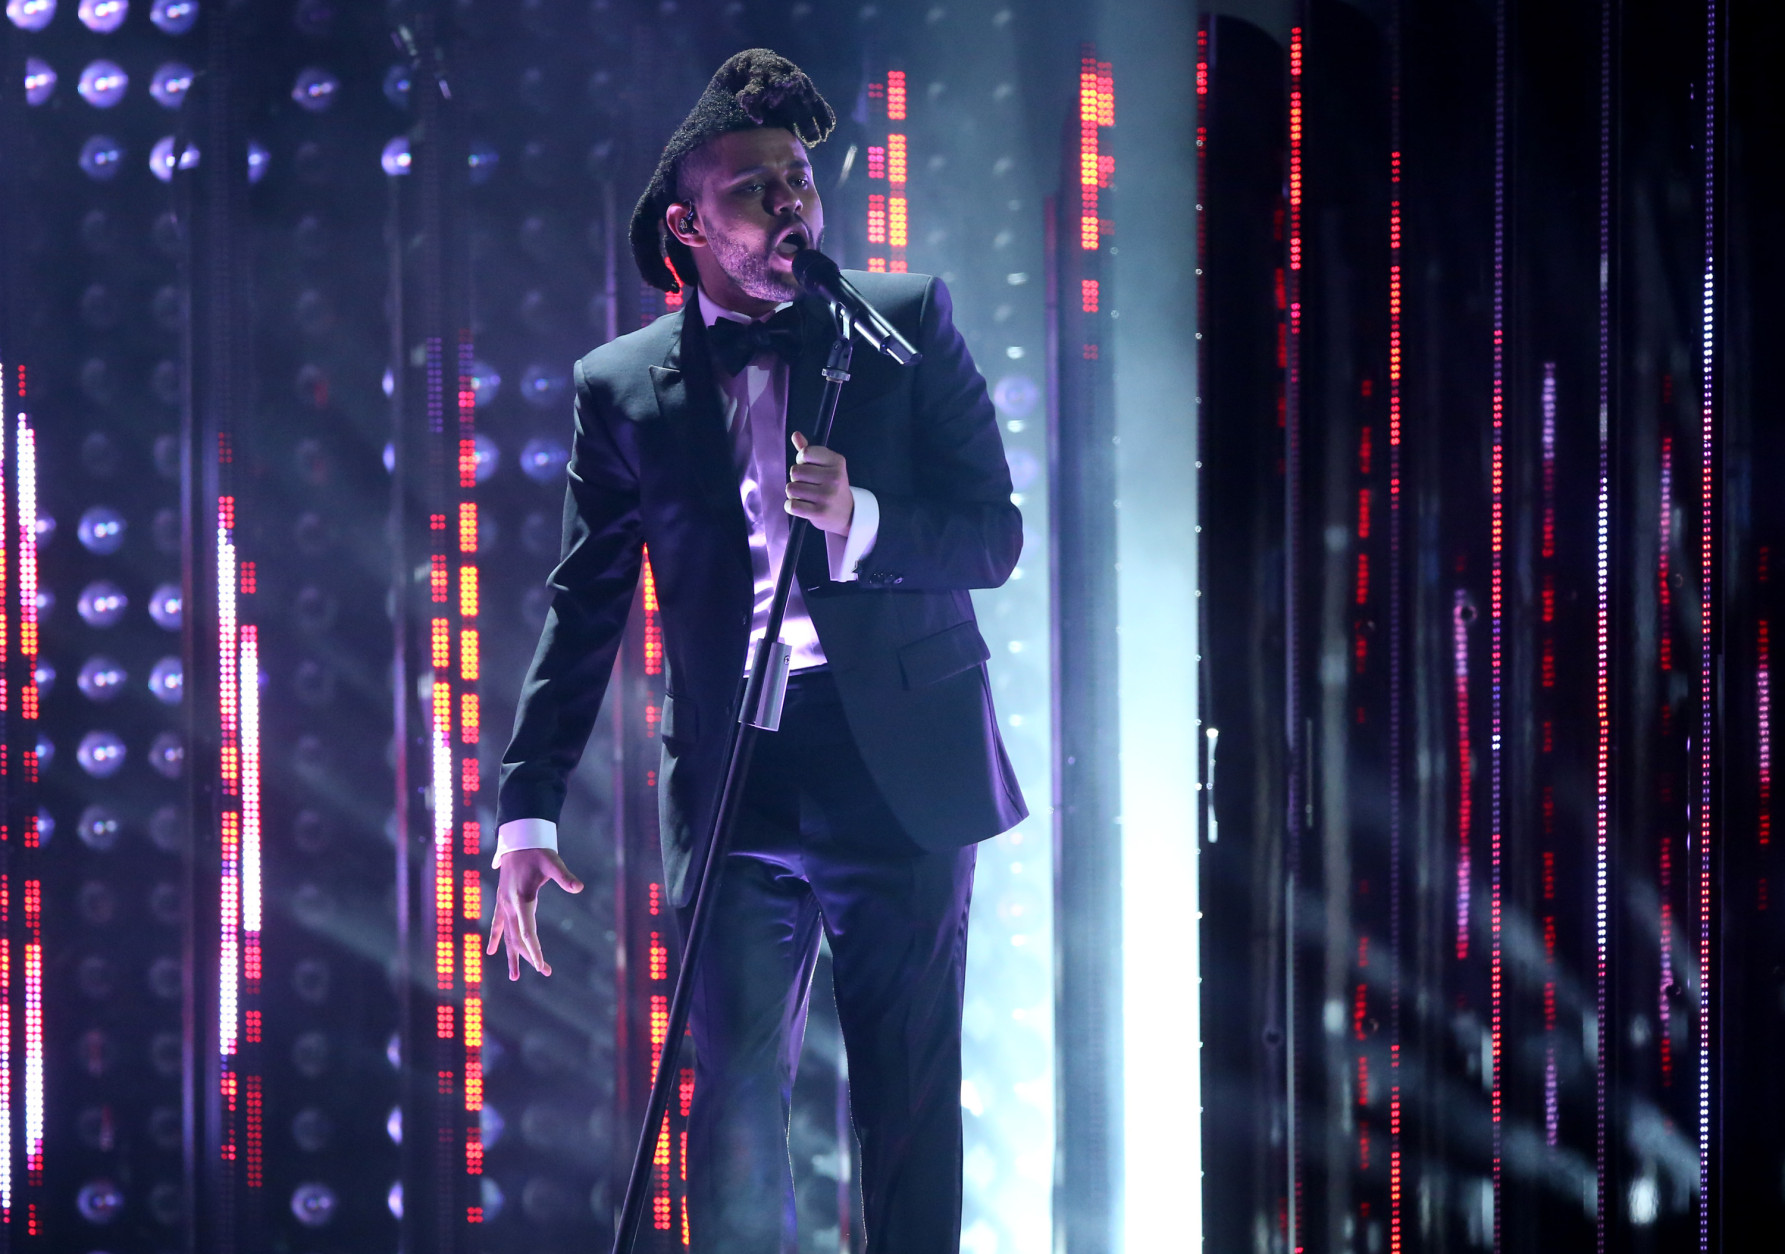 The Weeknd performs at the 58th annual Grammy Awards on Monday, Feb. 15, 2016, in Los Angeles. (Photo by Matt Sayles/Invision/AP)